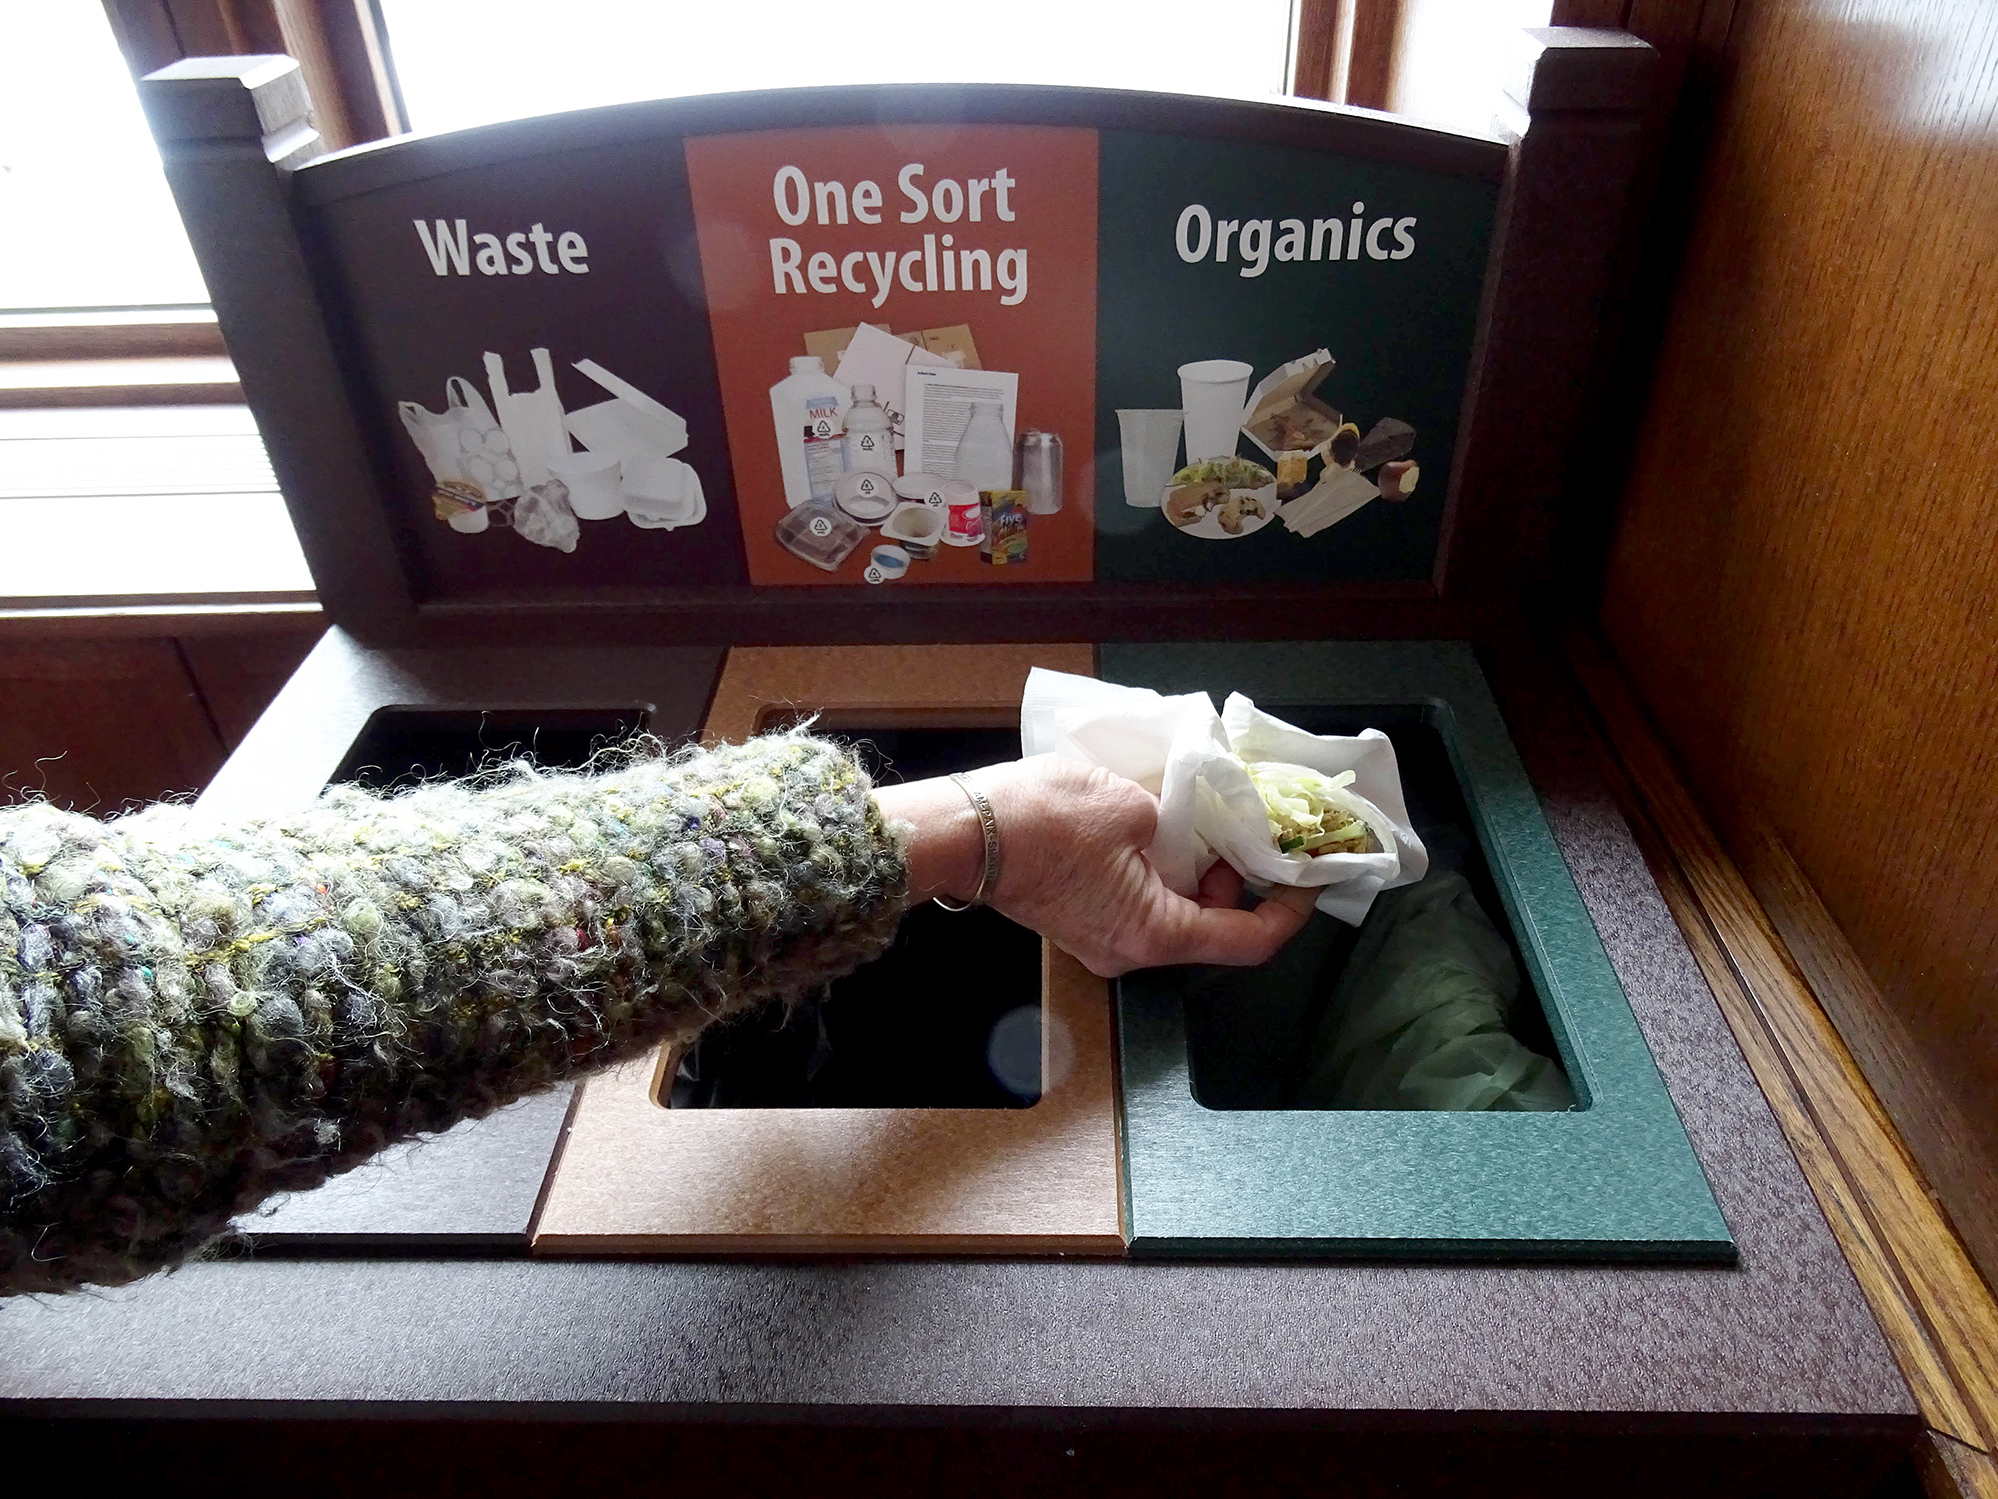 The compost/recycle system at Plymouth Congregational Church in Minneapolis, Minn. According to Creation Justice Ministries, it's just one example of the various projects churches have implemented to reduce waste.